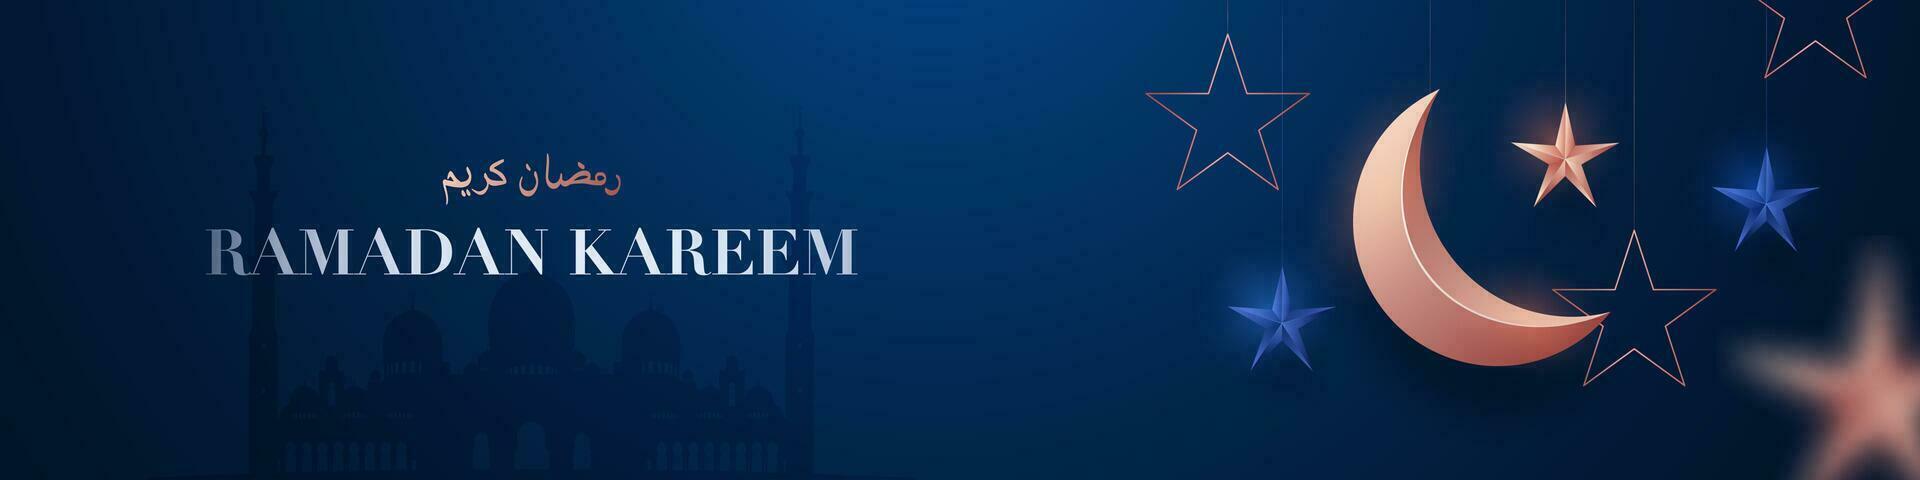 Ramadan Kareem horizontal banner with 3d rose gold crescent moon, stars and confetti on dark blue background. vector